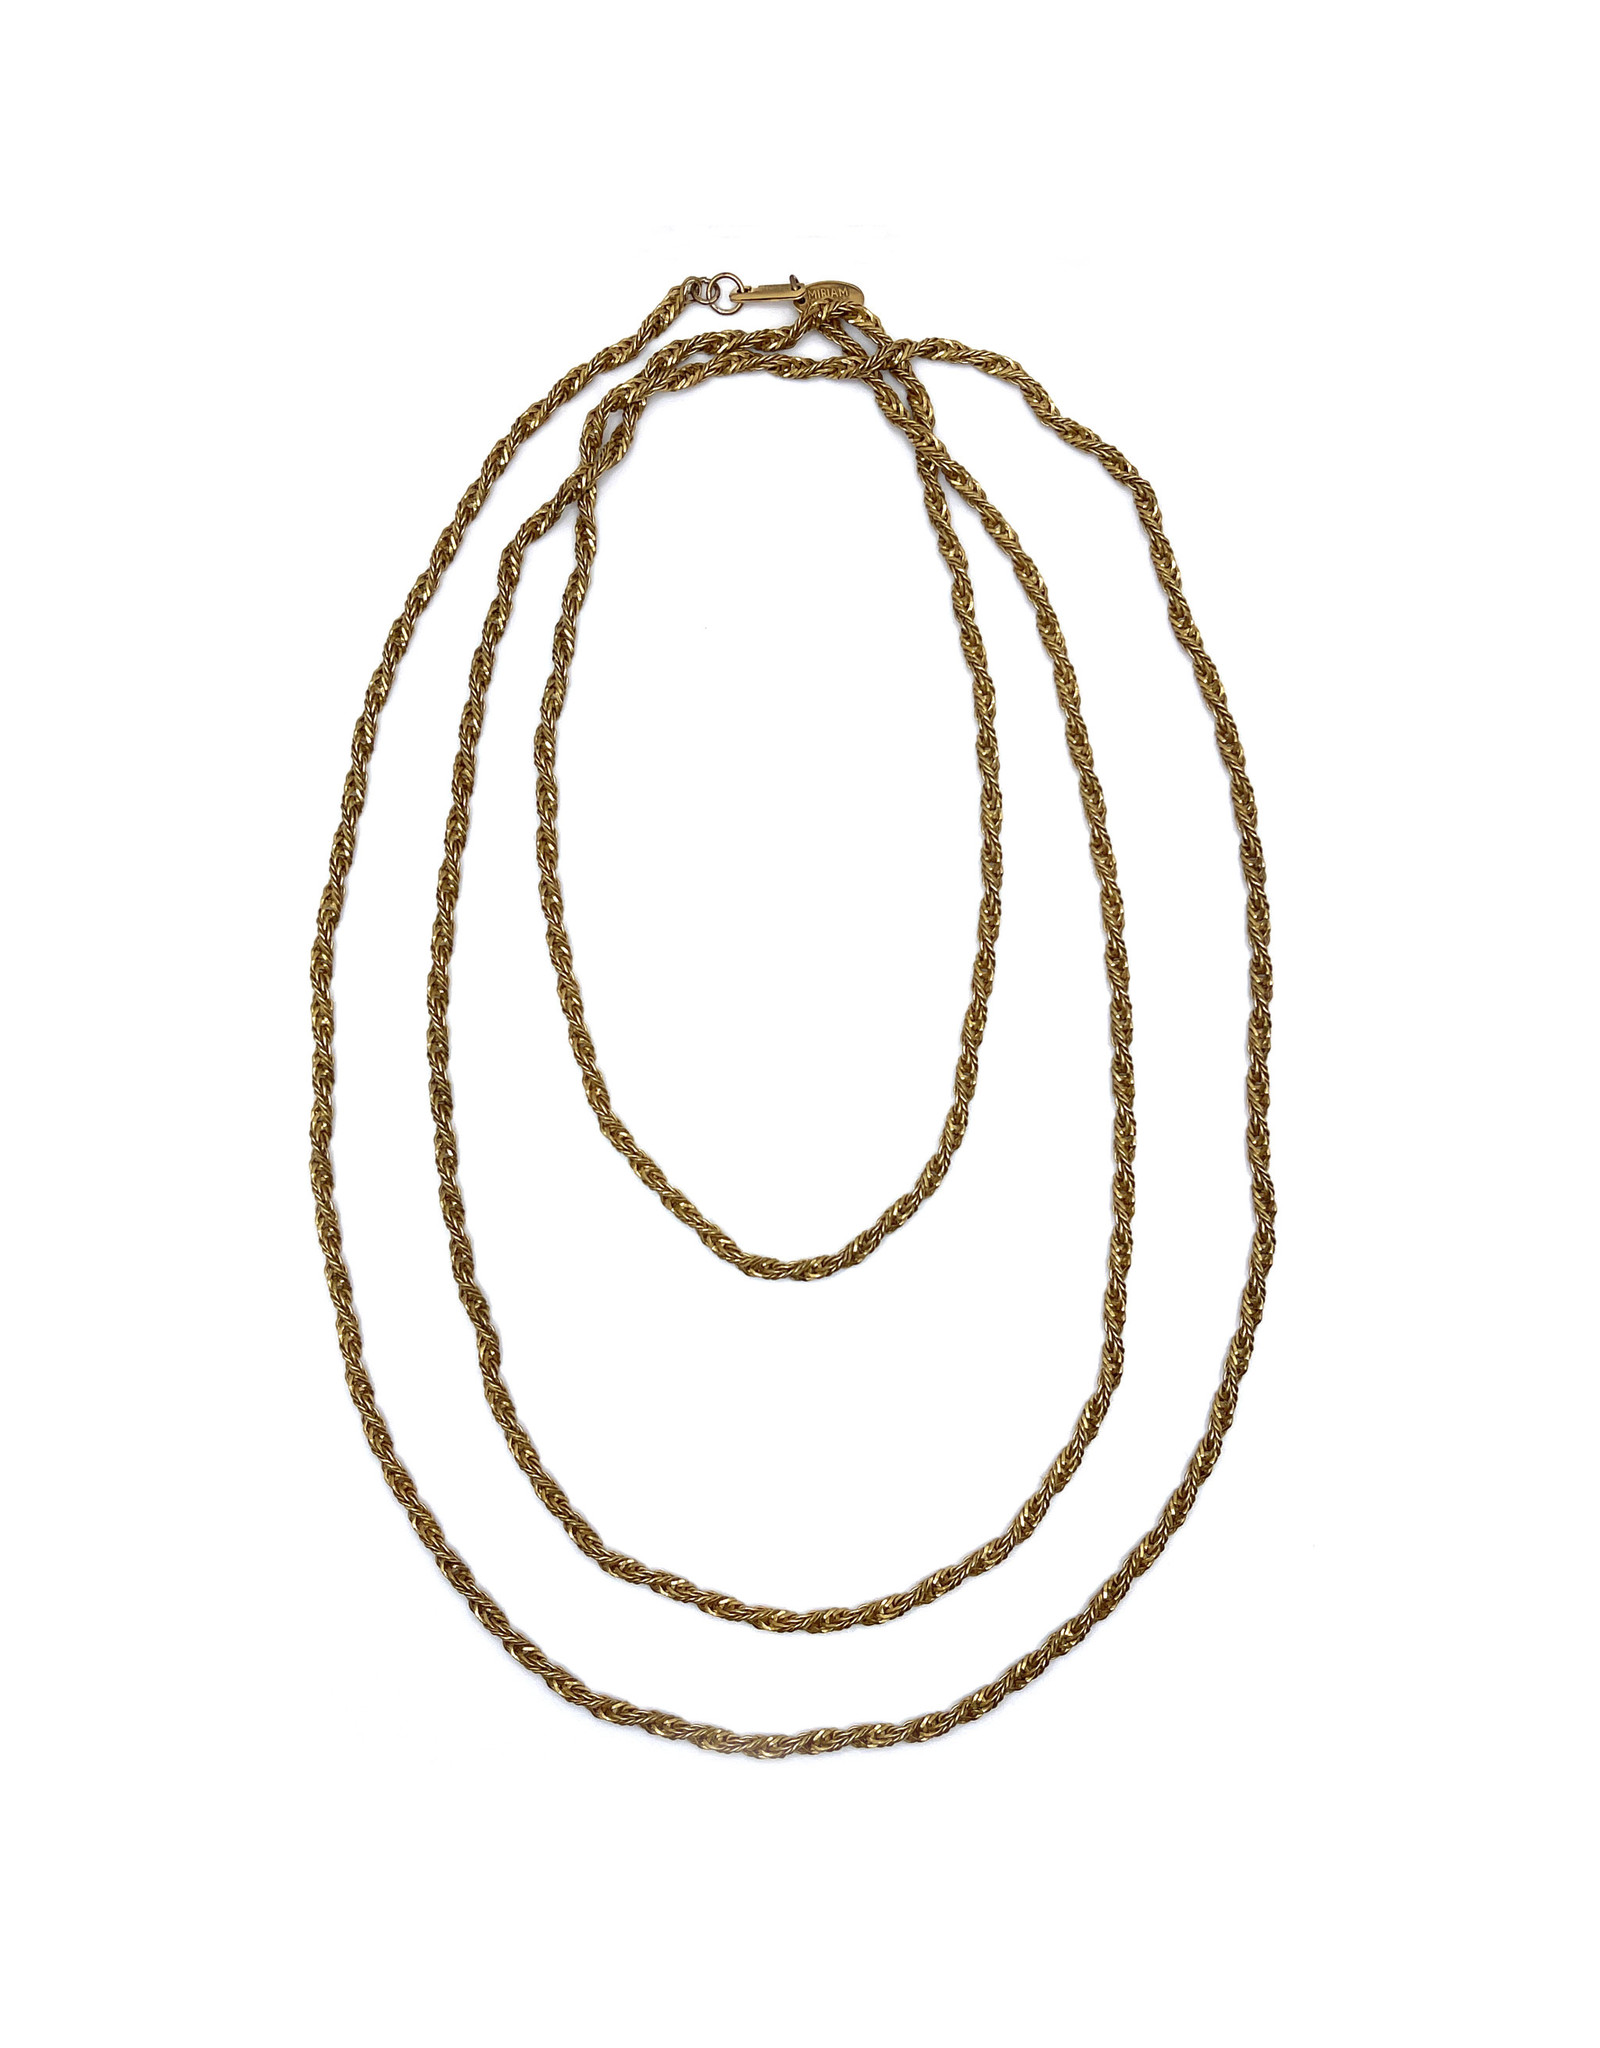 Miriam Haskell 59 In. Vintage Goldtone Chain